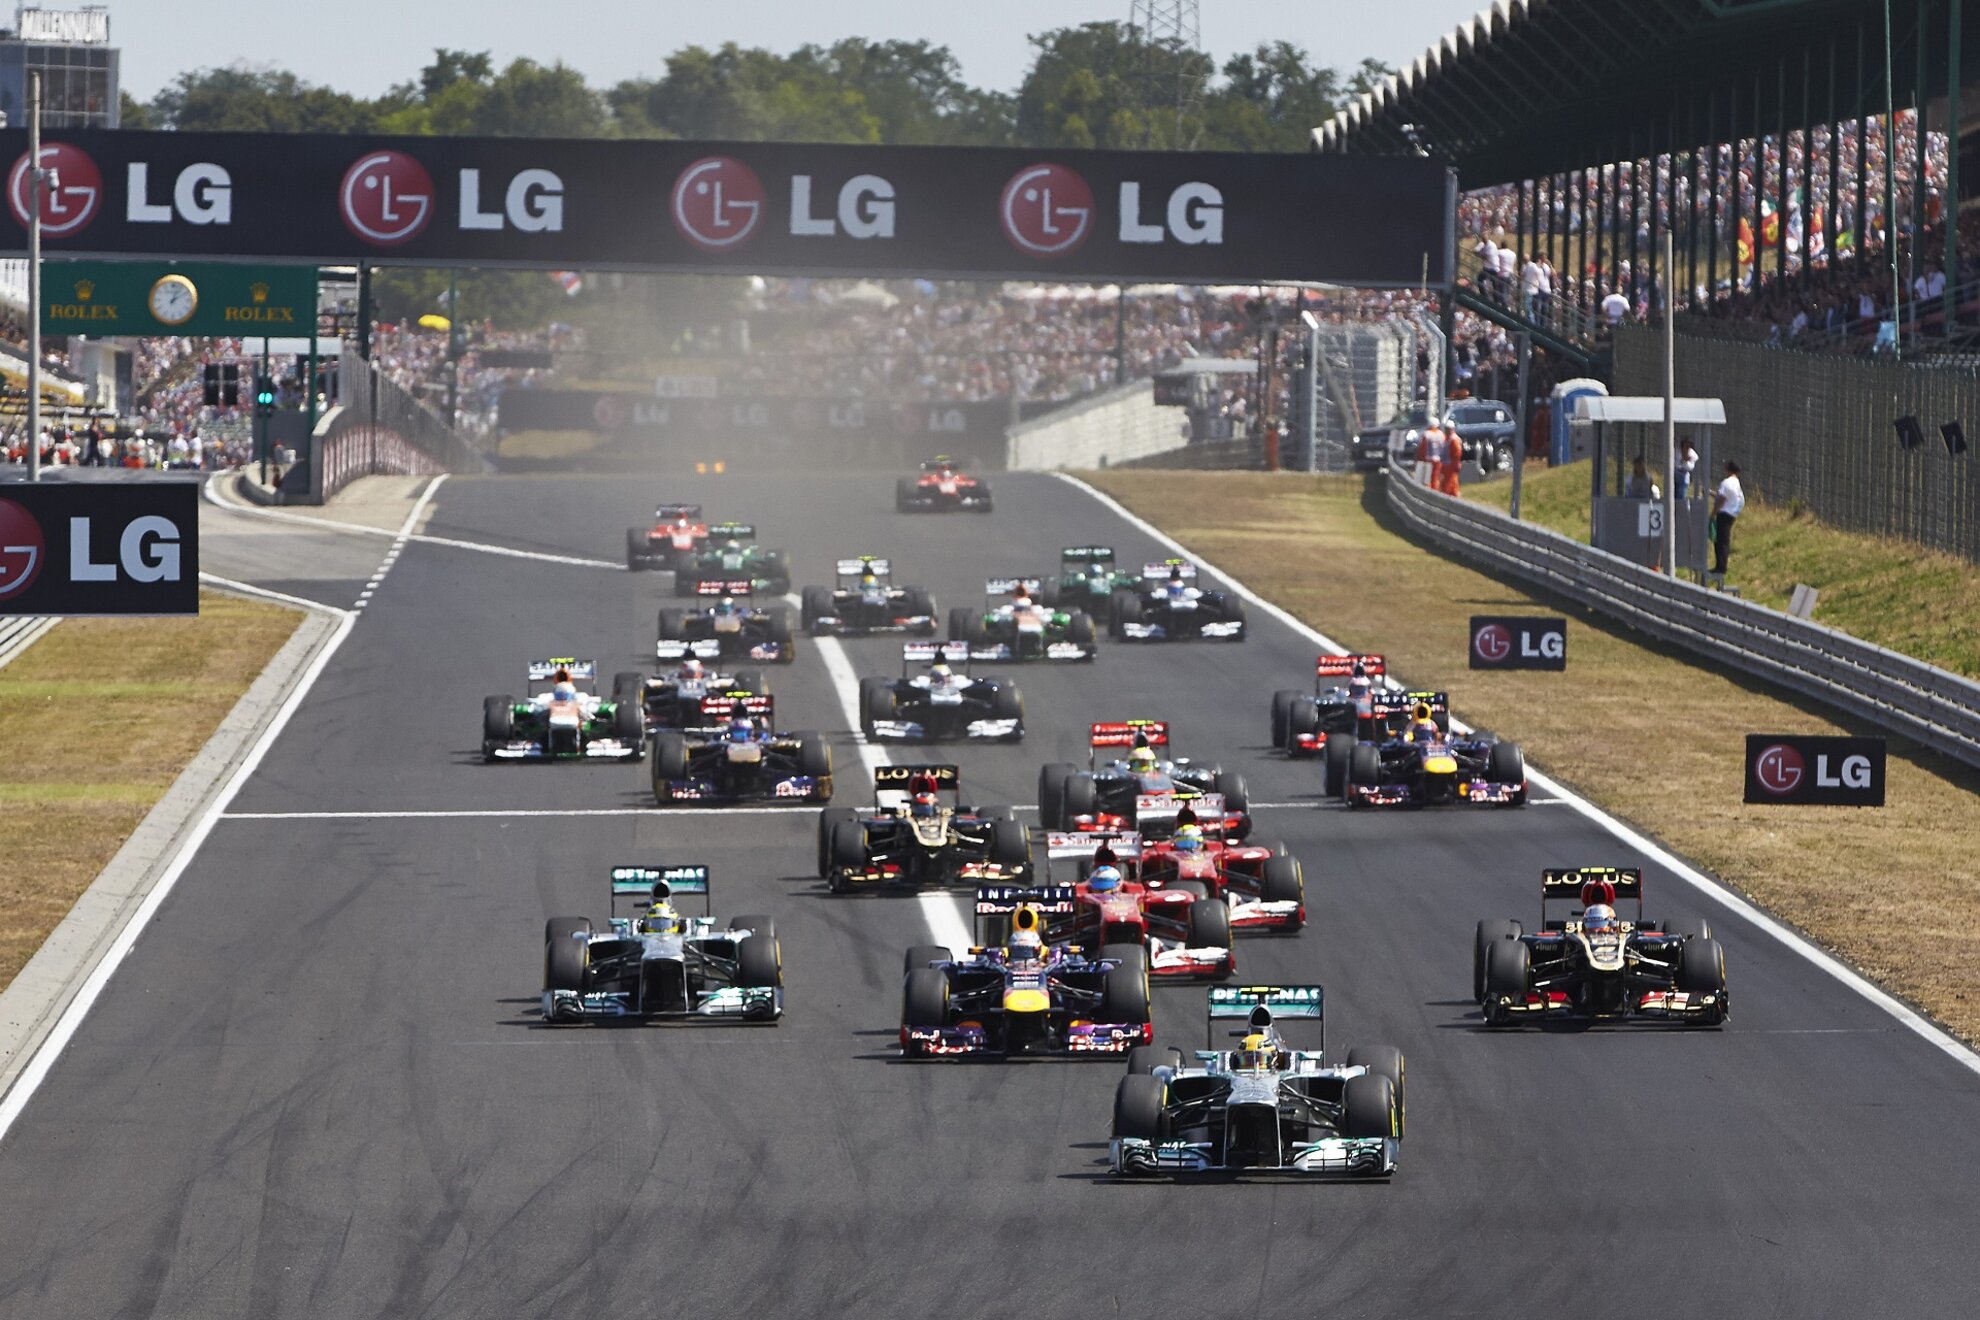 Course of Action 30 years of the Formula 1 Hungarian Grand Prix